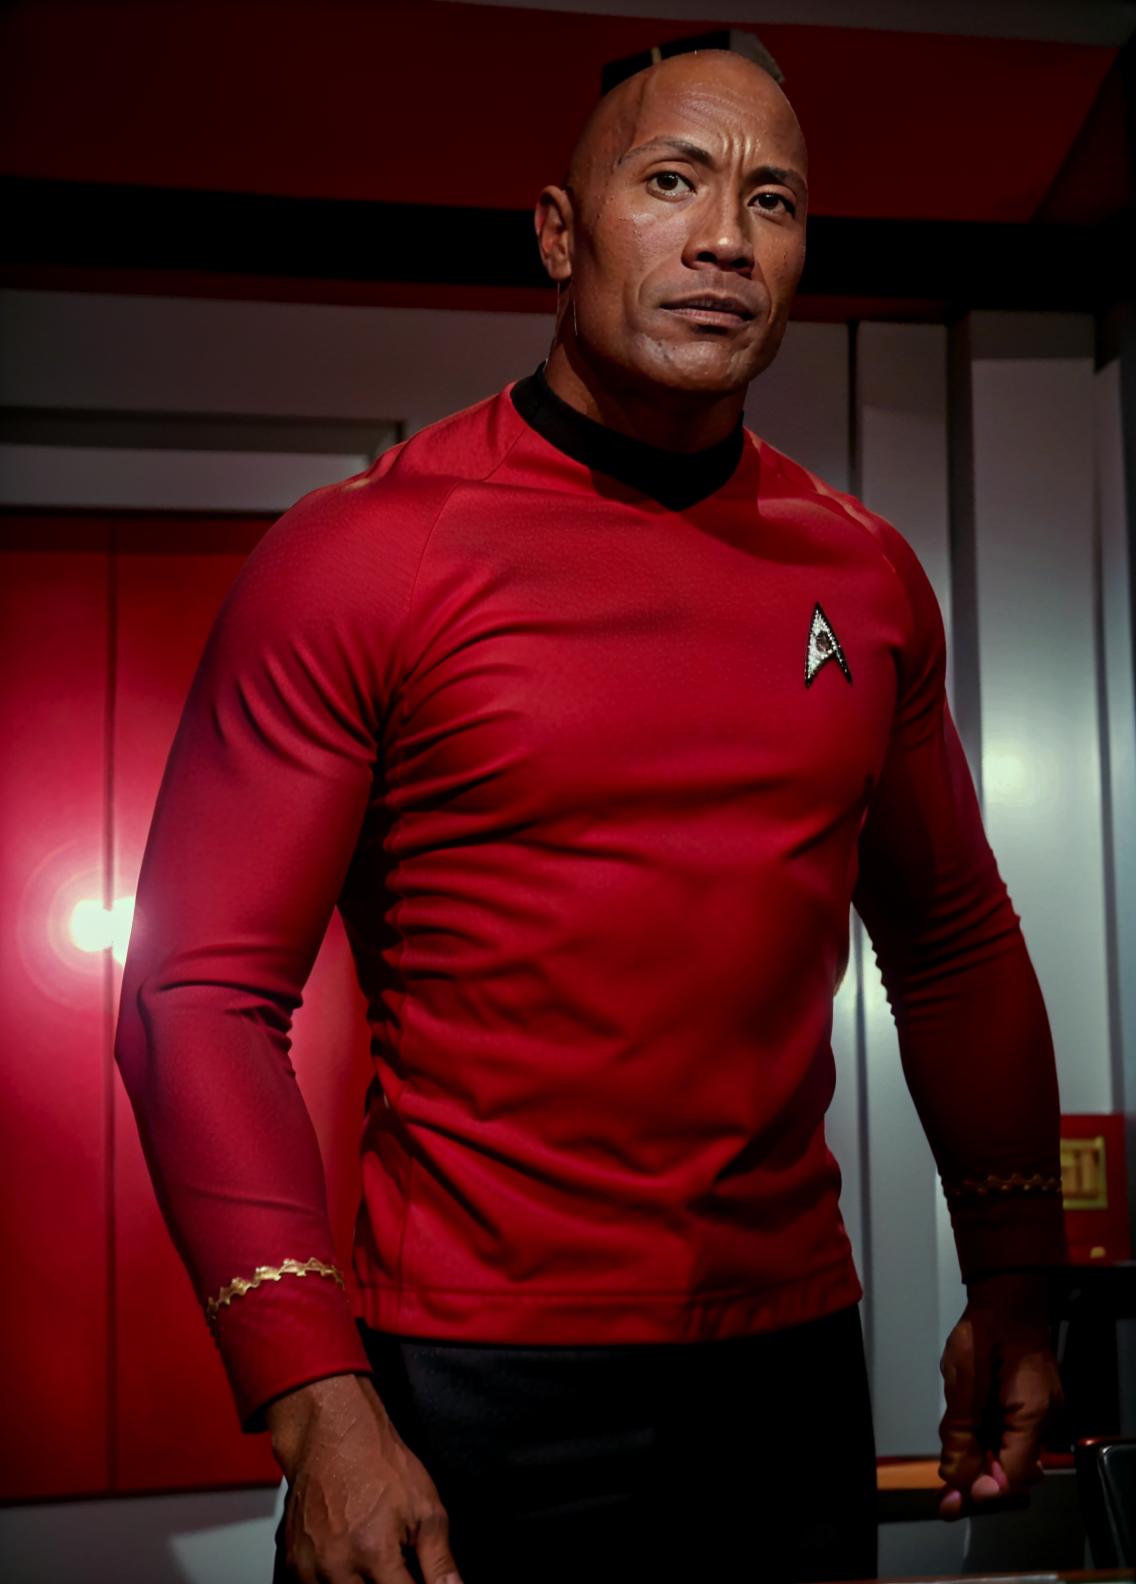 Star Trek TOS uniforms image by impossiblebearcl4060